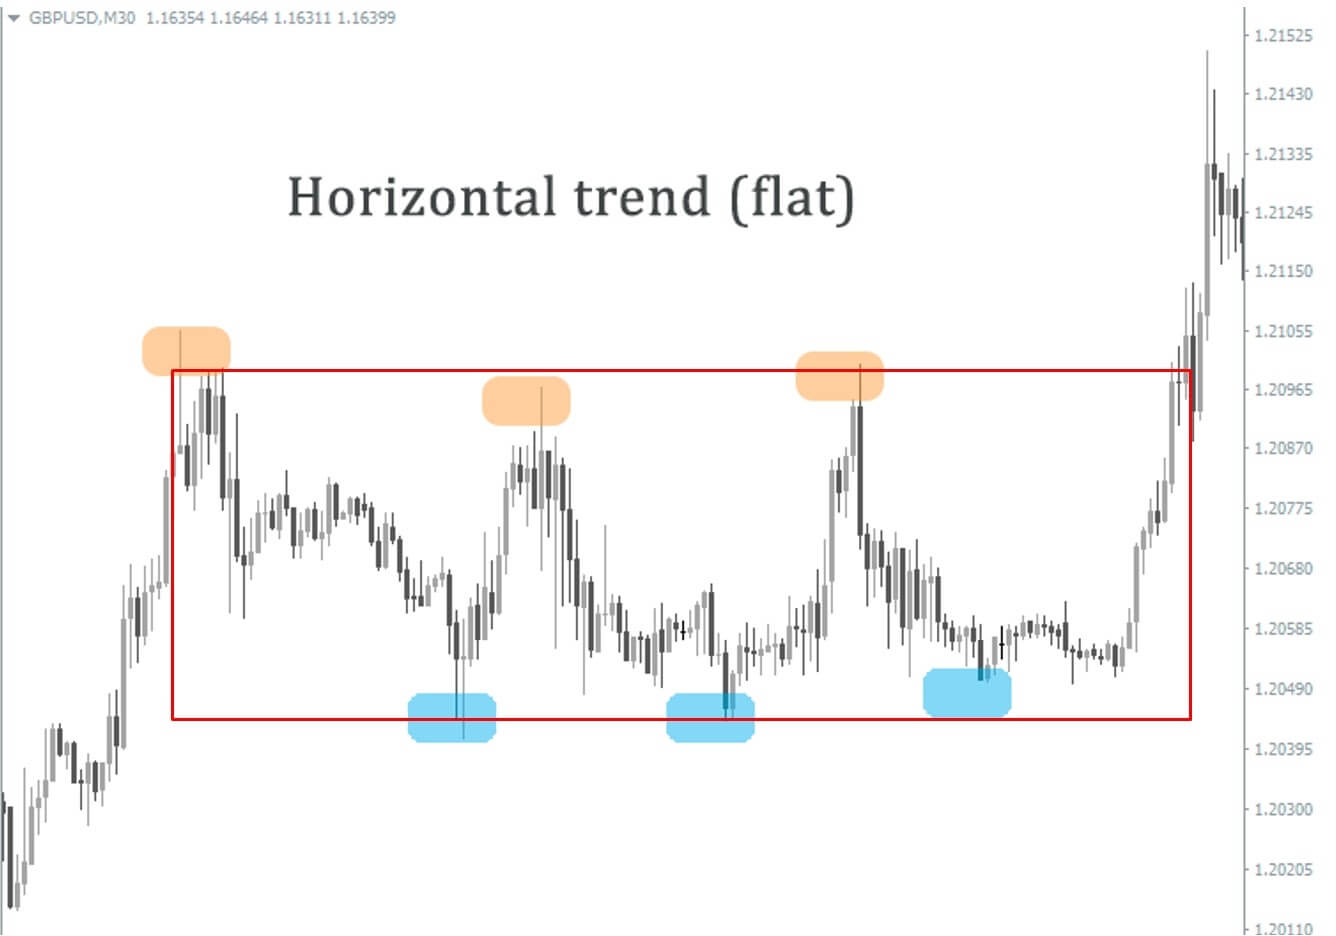 Horizontal trend on the chart